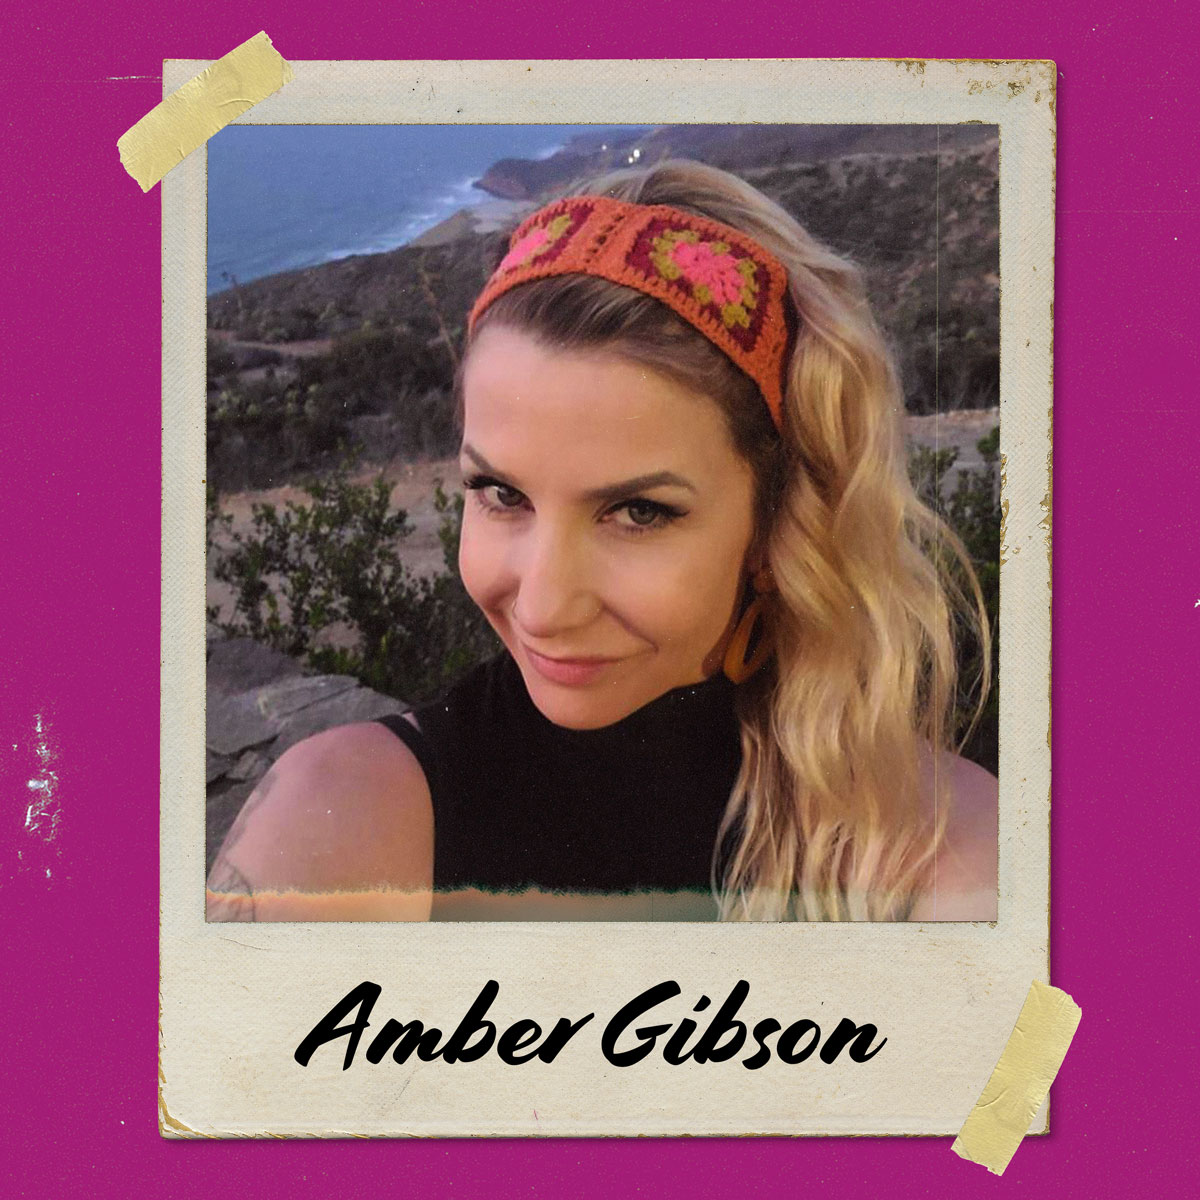 The owner, Amber Gibson